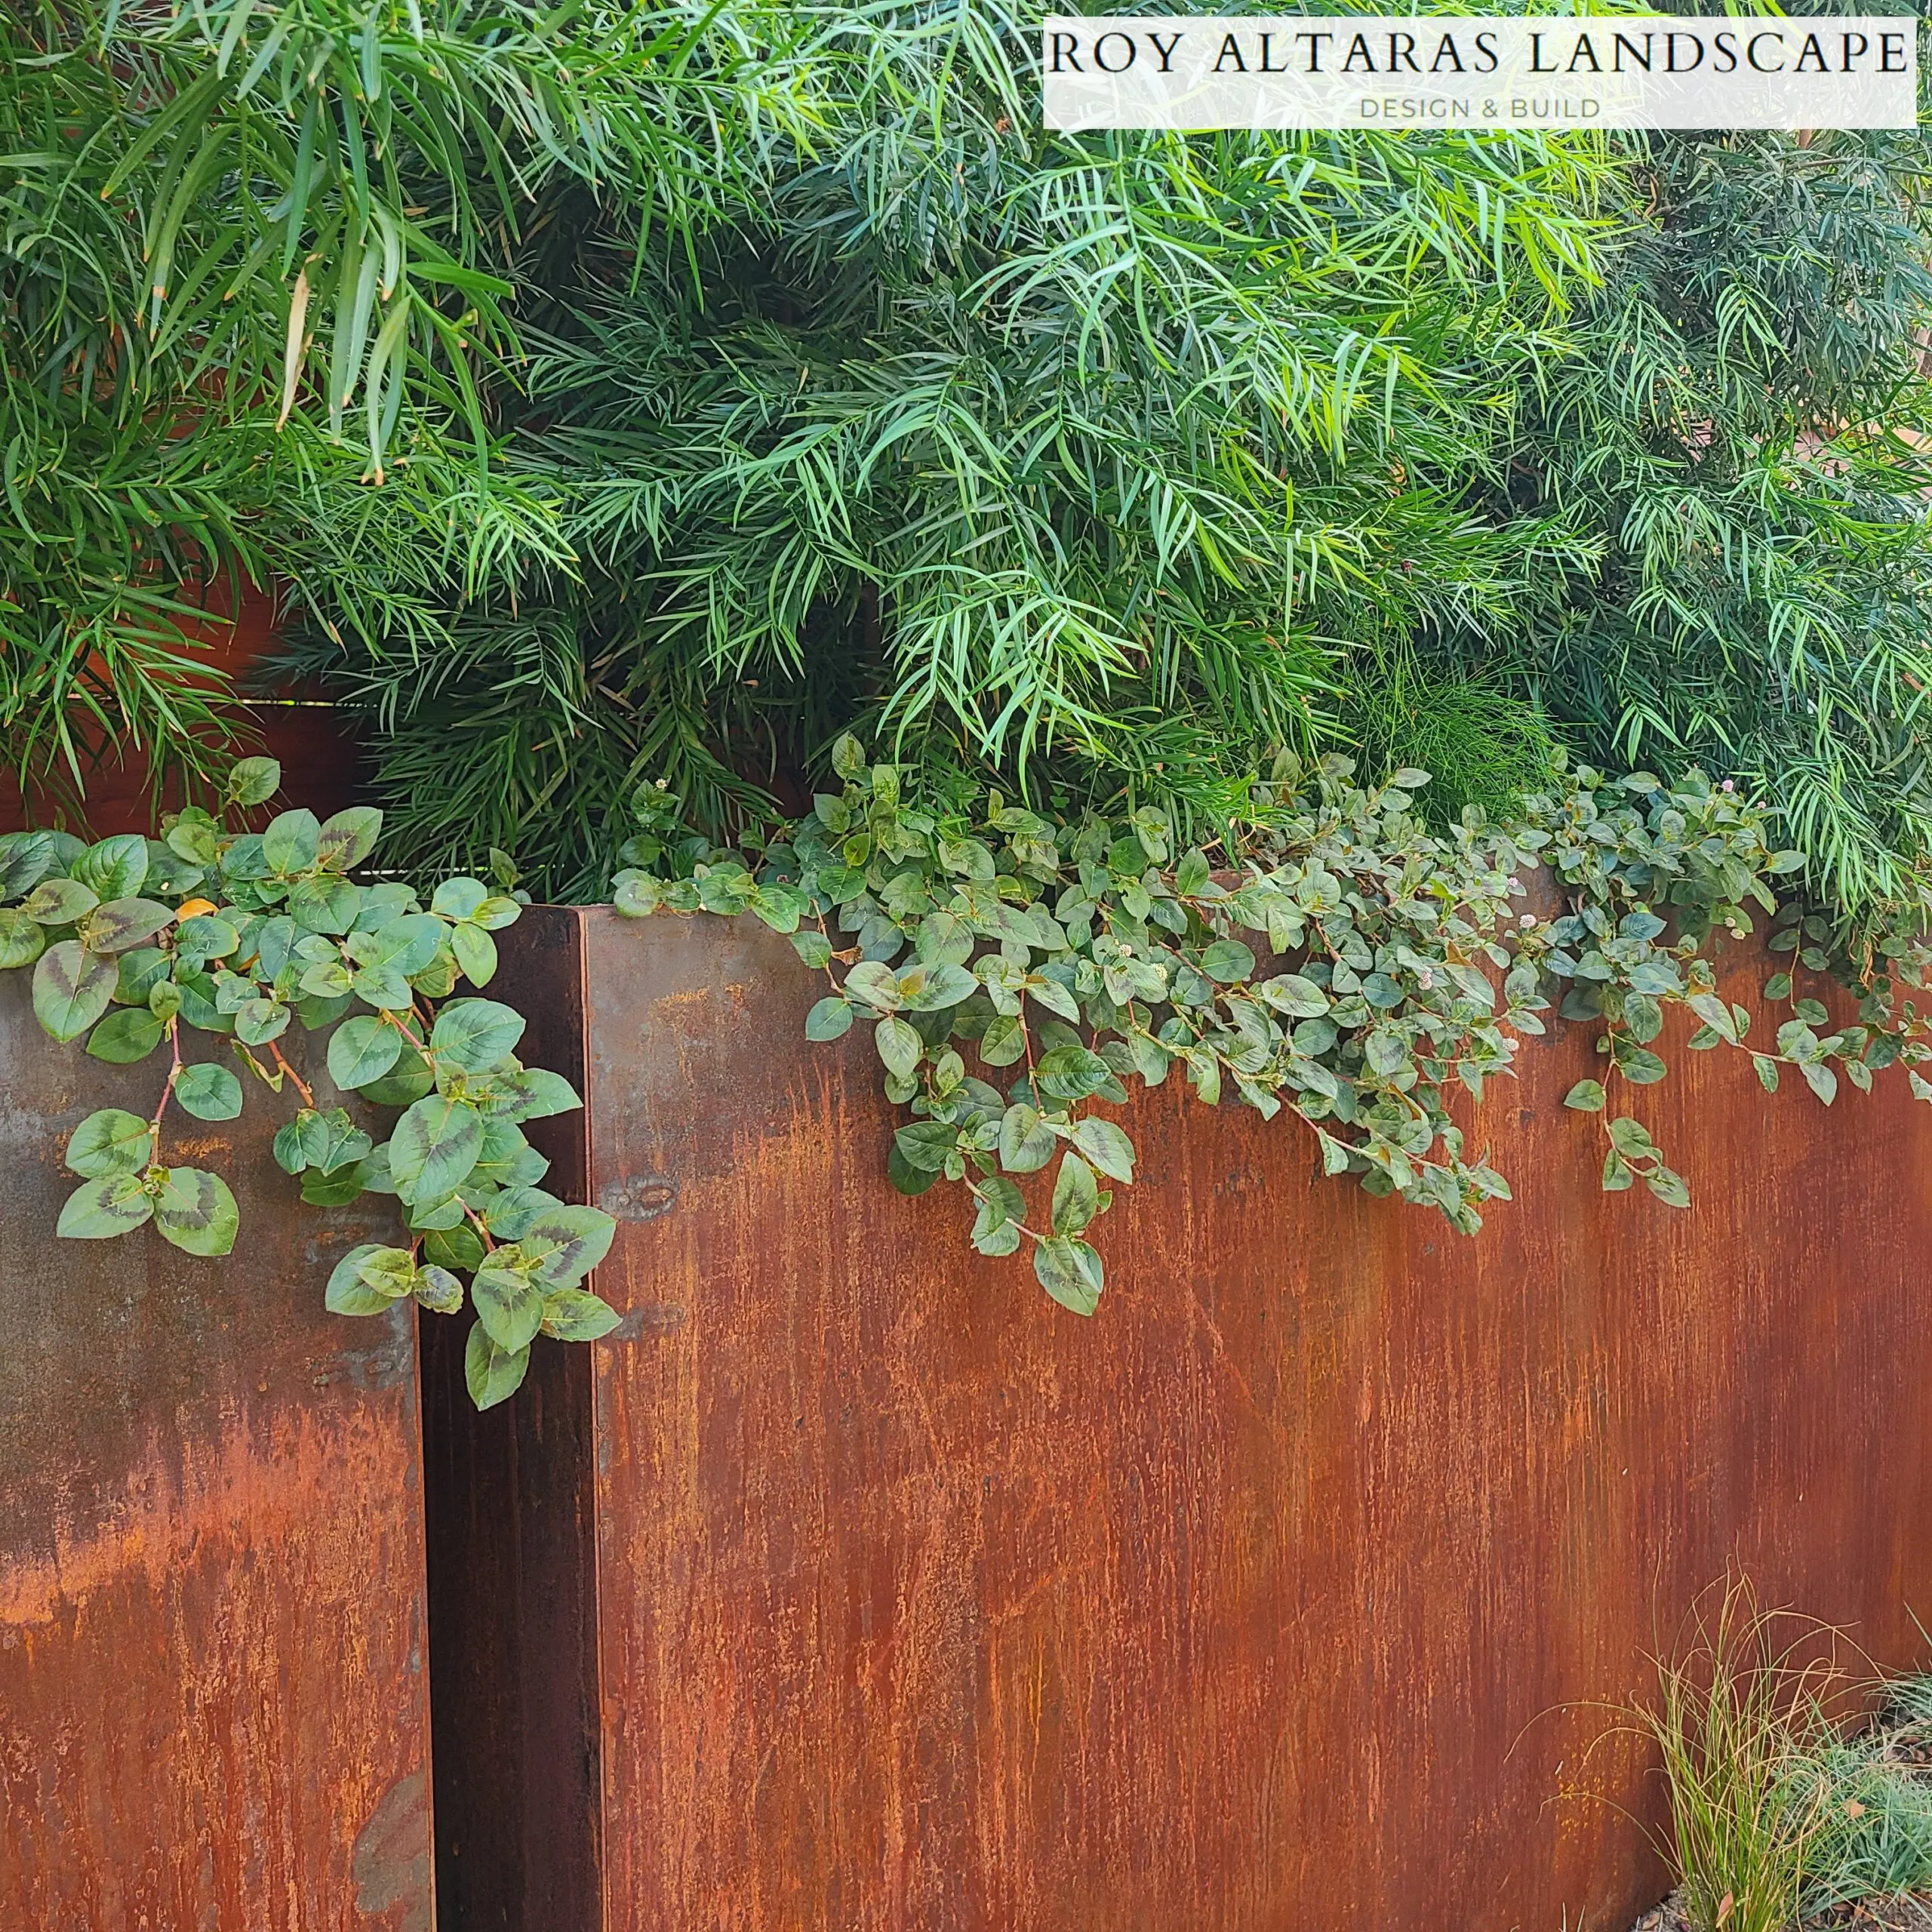 A Corten Steel planter with vibrant green plants growing in them.